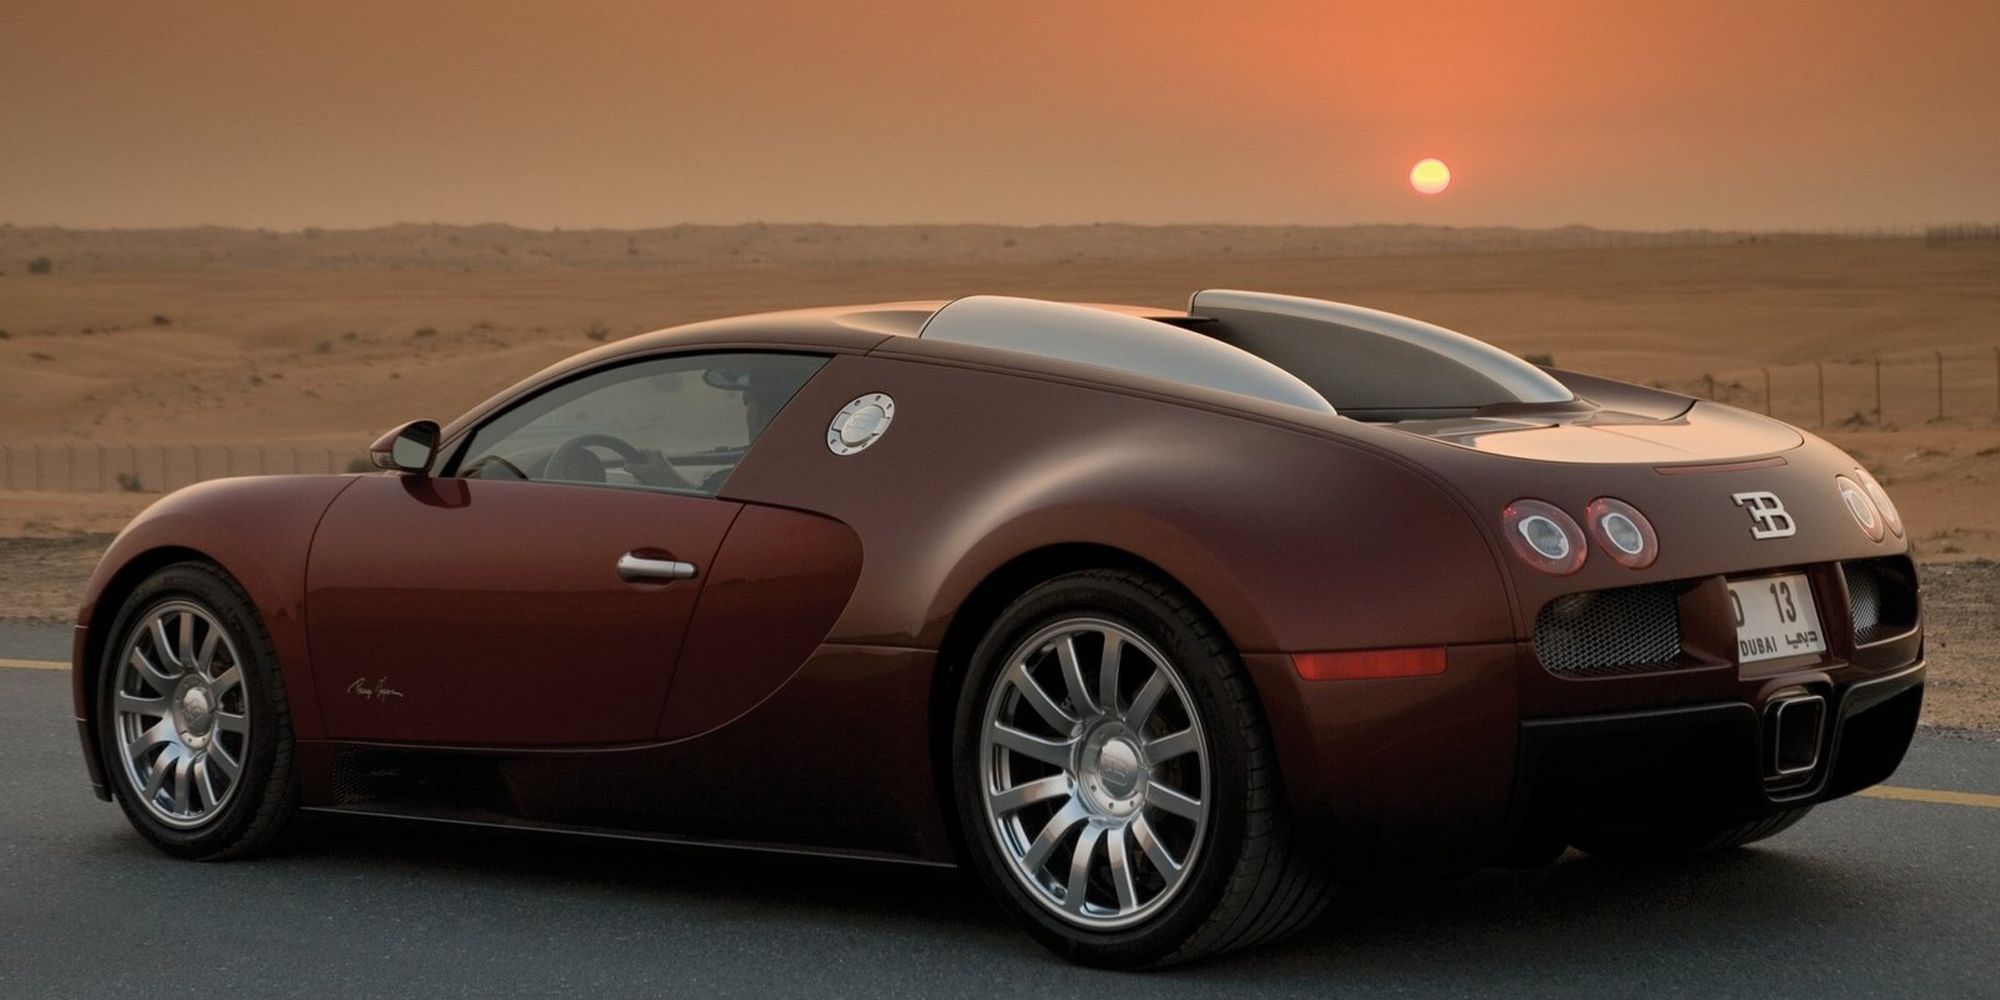 Rear 3/4 view of a red Veyron